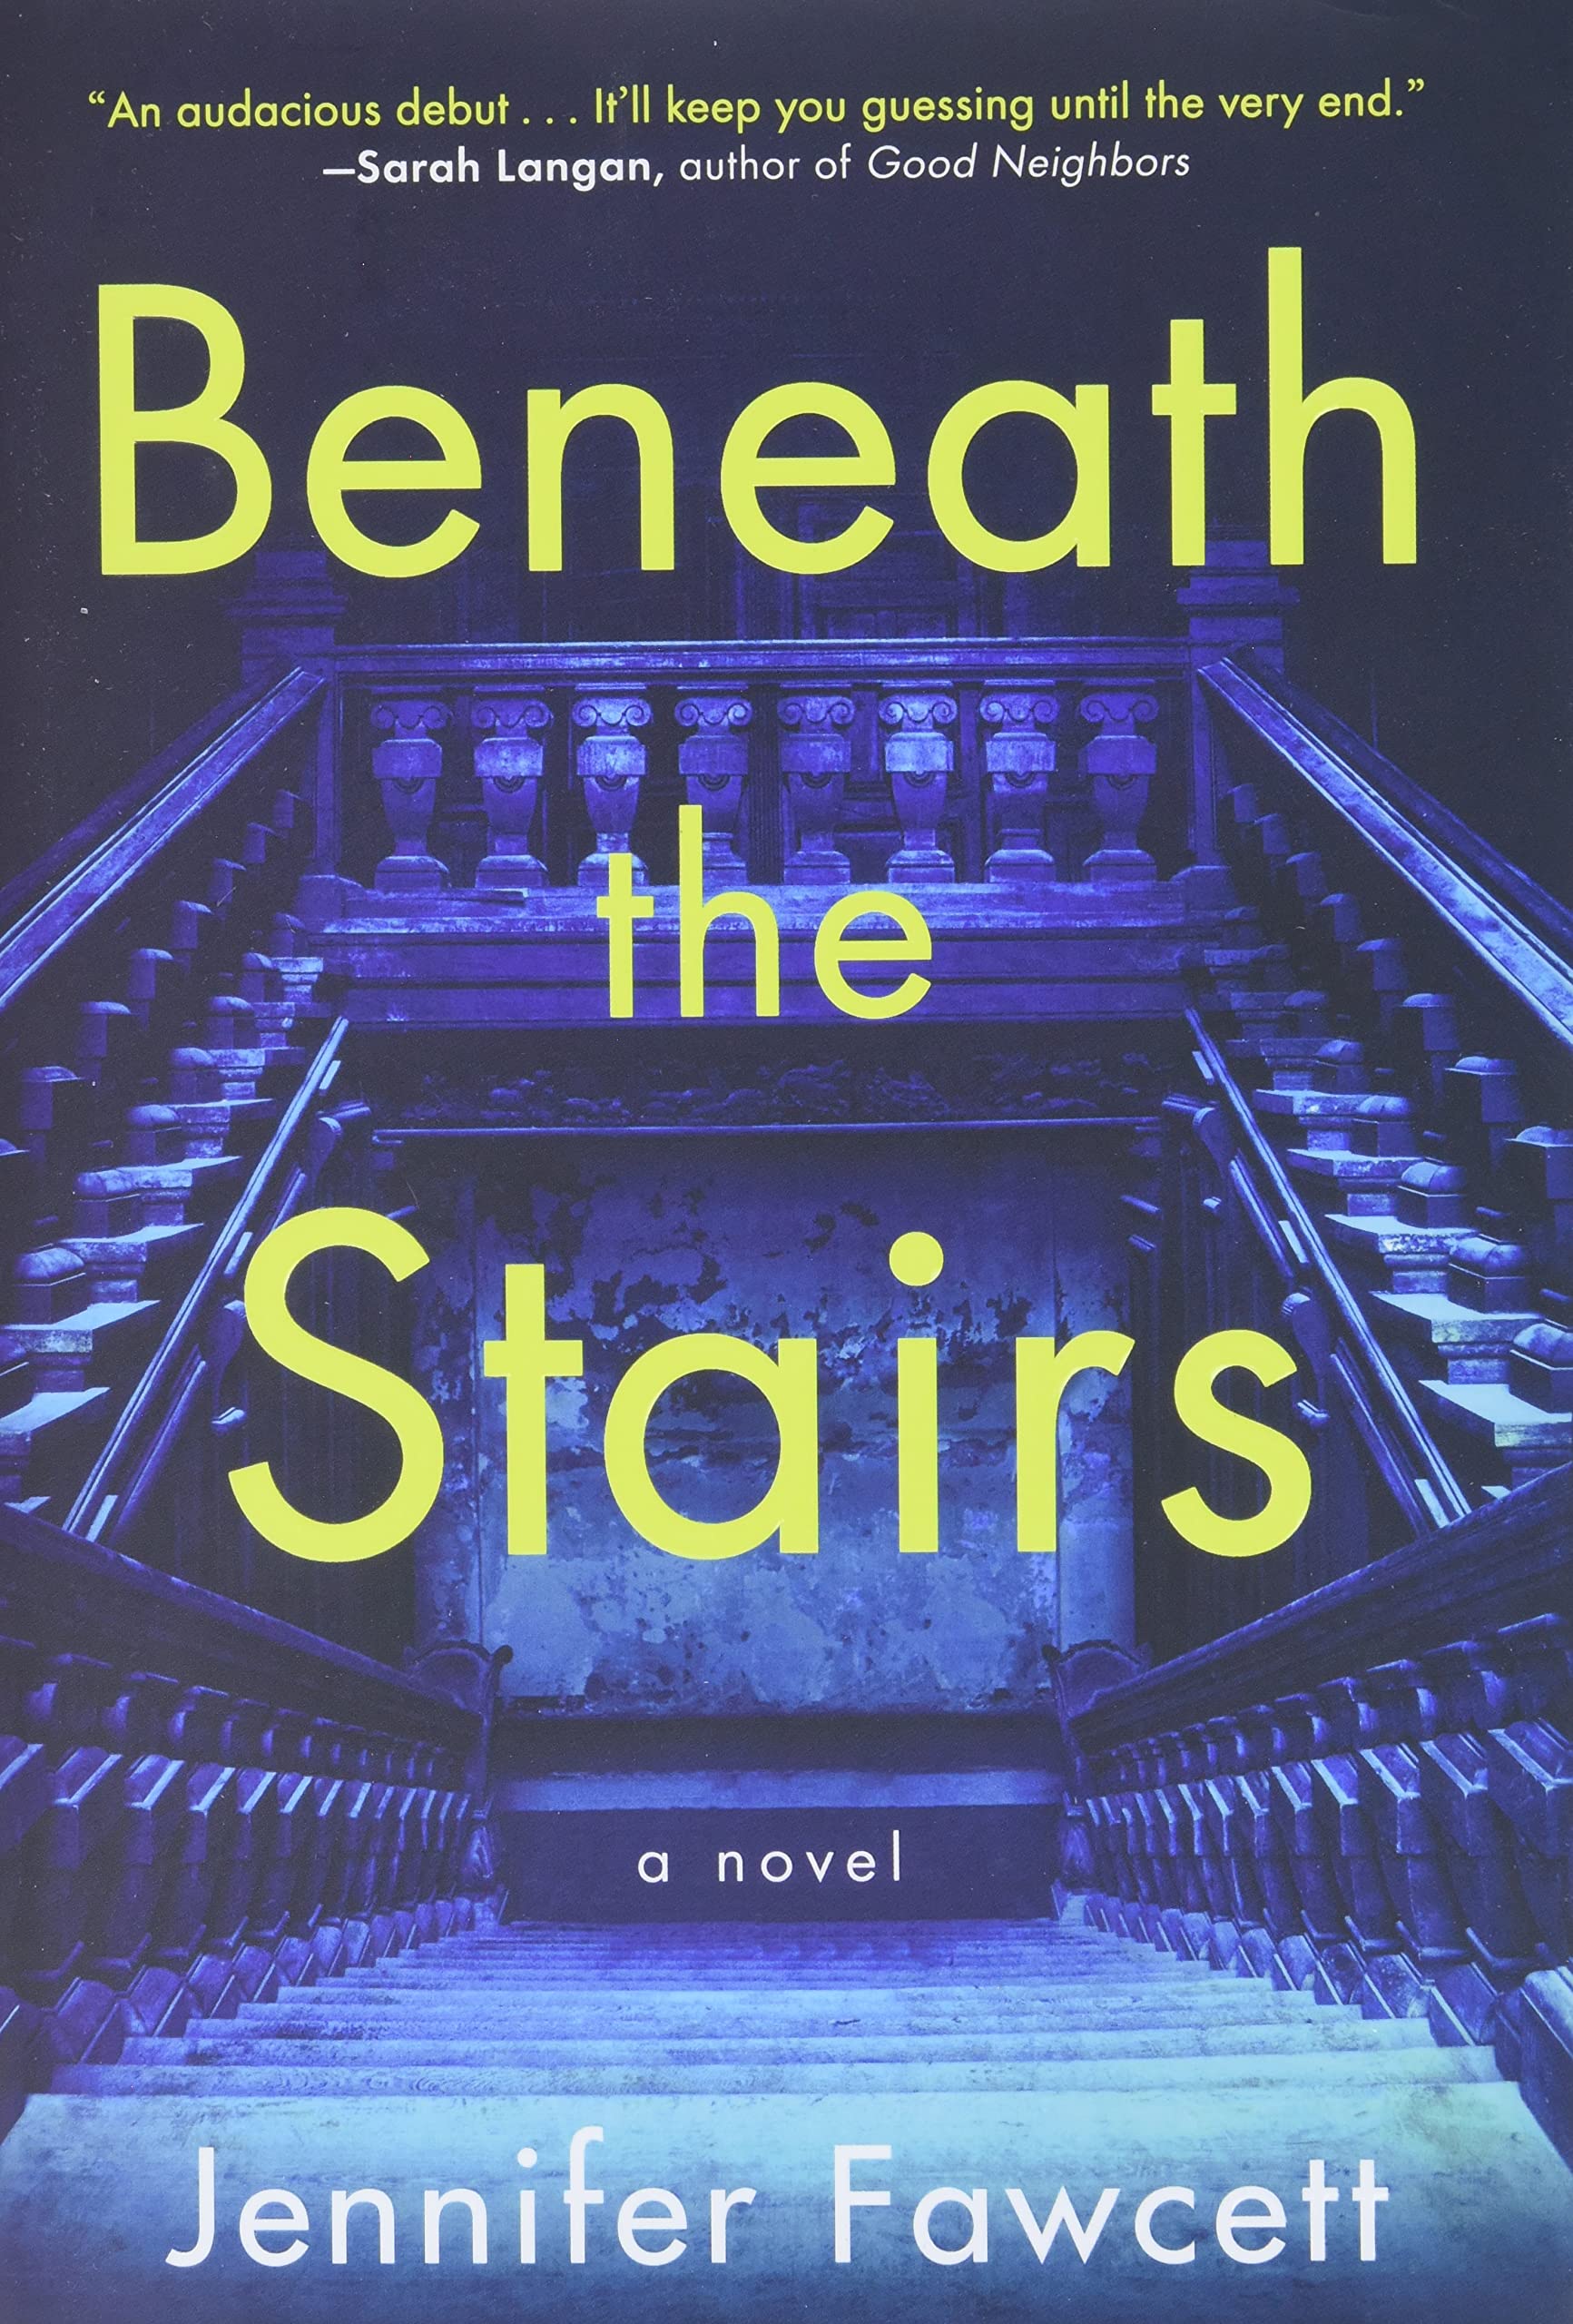 Image for "Beneath the Stairs"